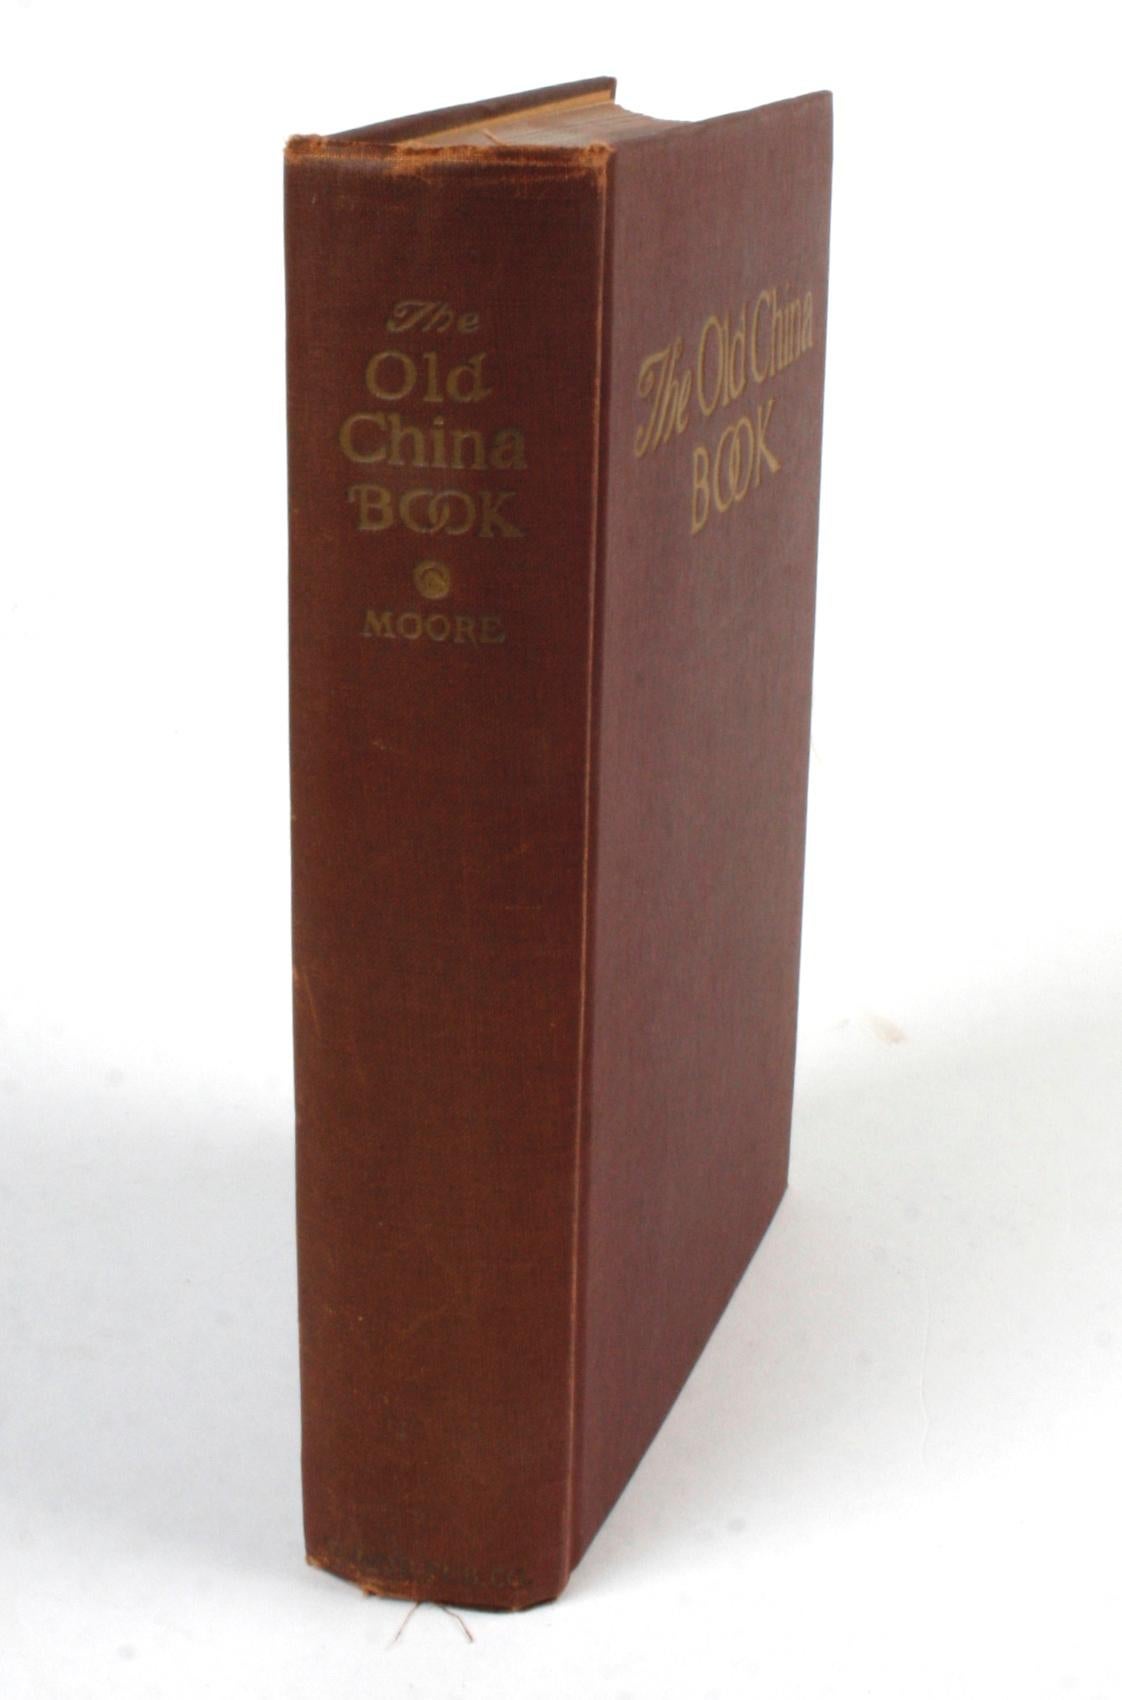 The Old China Book by N. Hudson Moore. New York: Tudor Publishing Company, 1937. Hardcover with no dust jacket. 300 pp. A comprehensive resource book on early pottery and English china first published in 1903. The book includes sections on